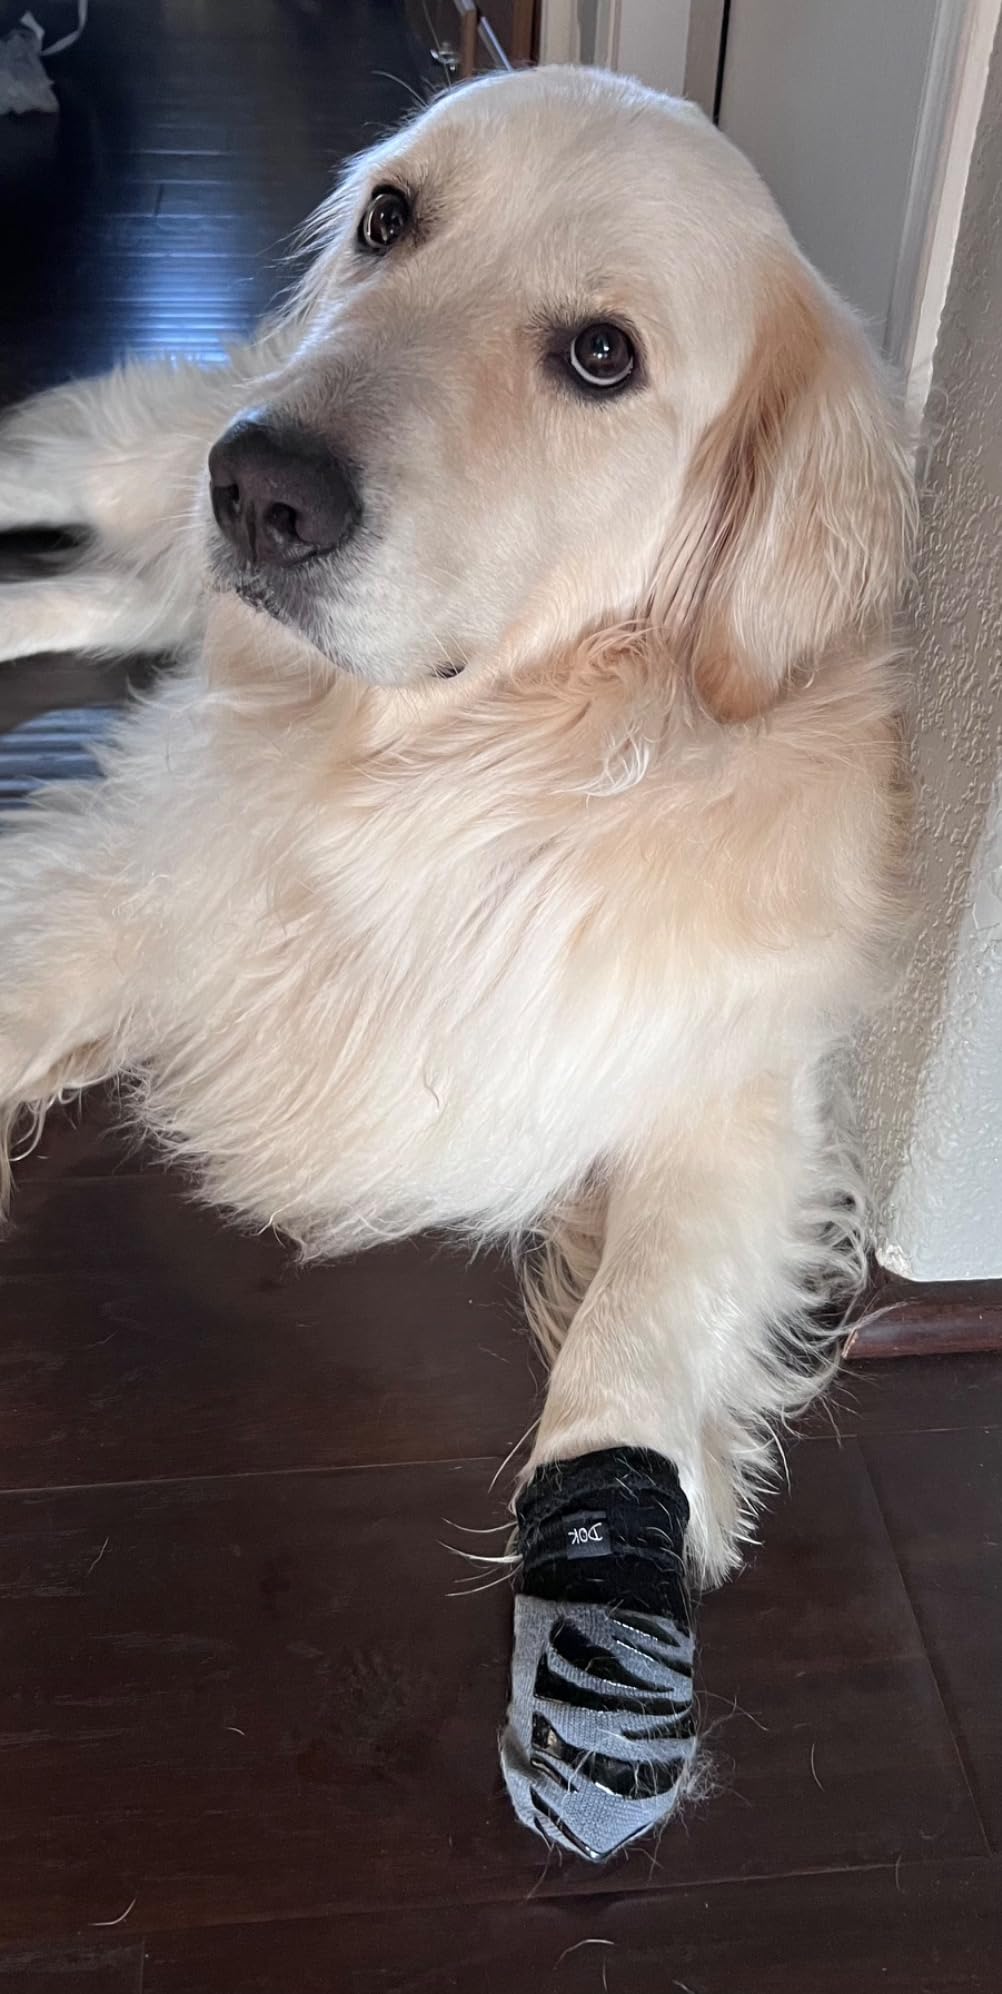 Labrador Retriever wearing dog grip socks instead of cone to prevent dog licking his paws